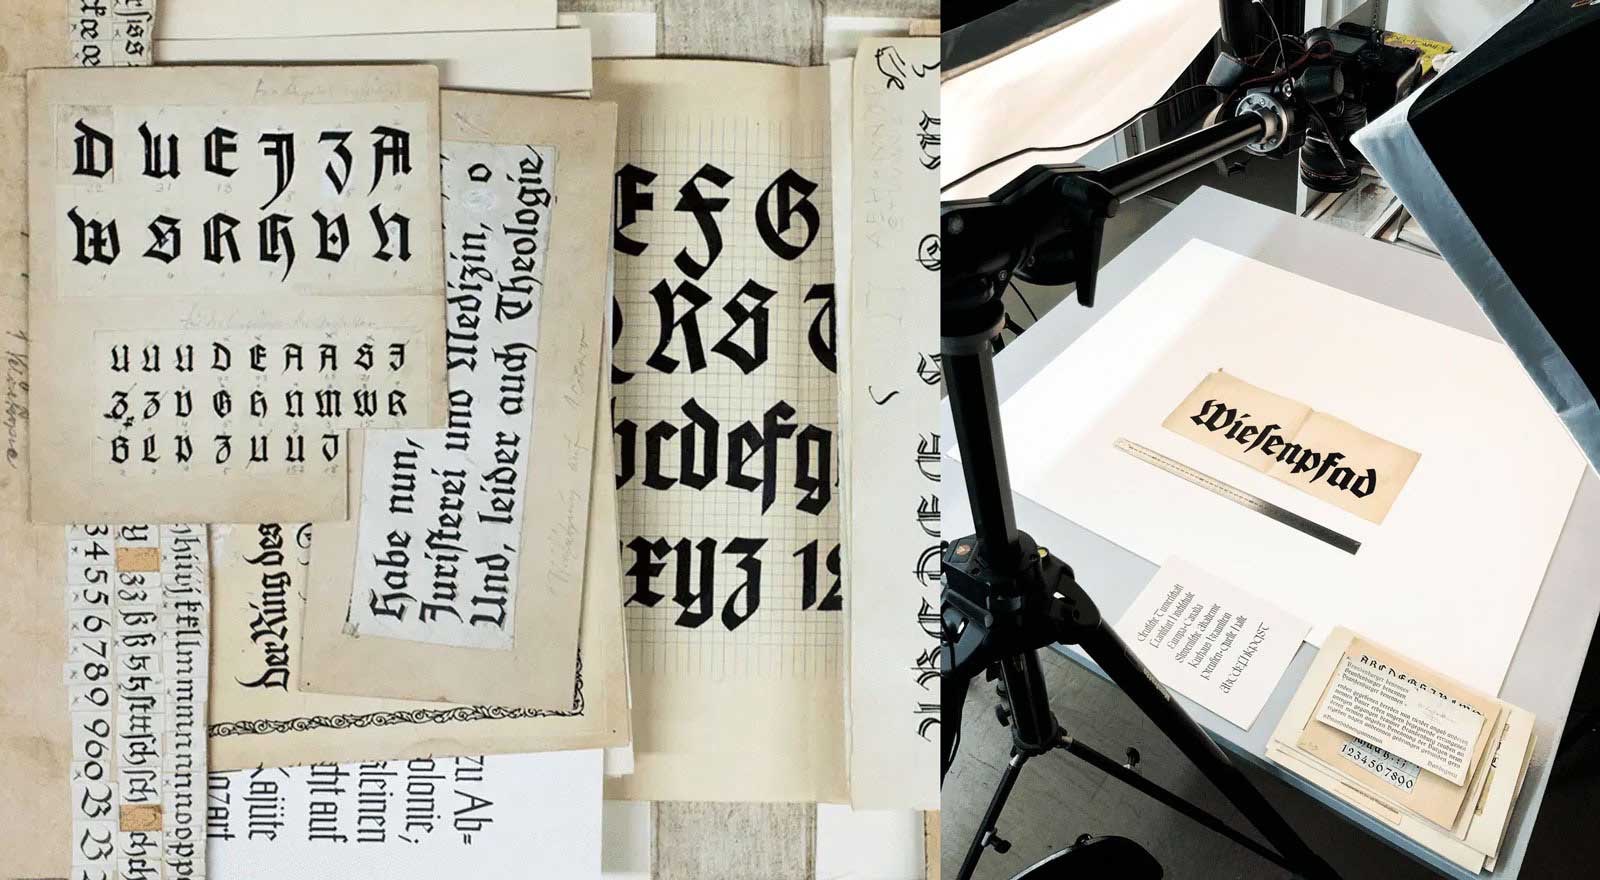 More information about "Klingspor type archive website launched"